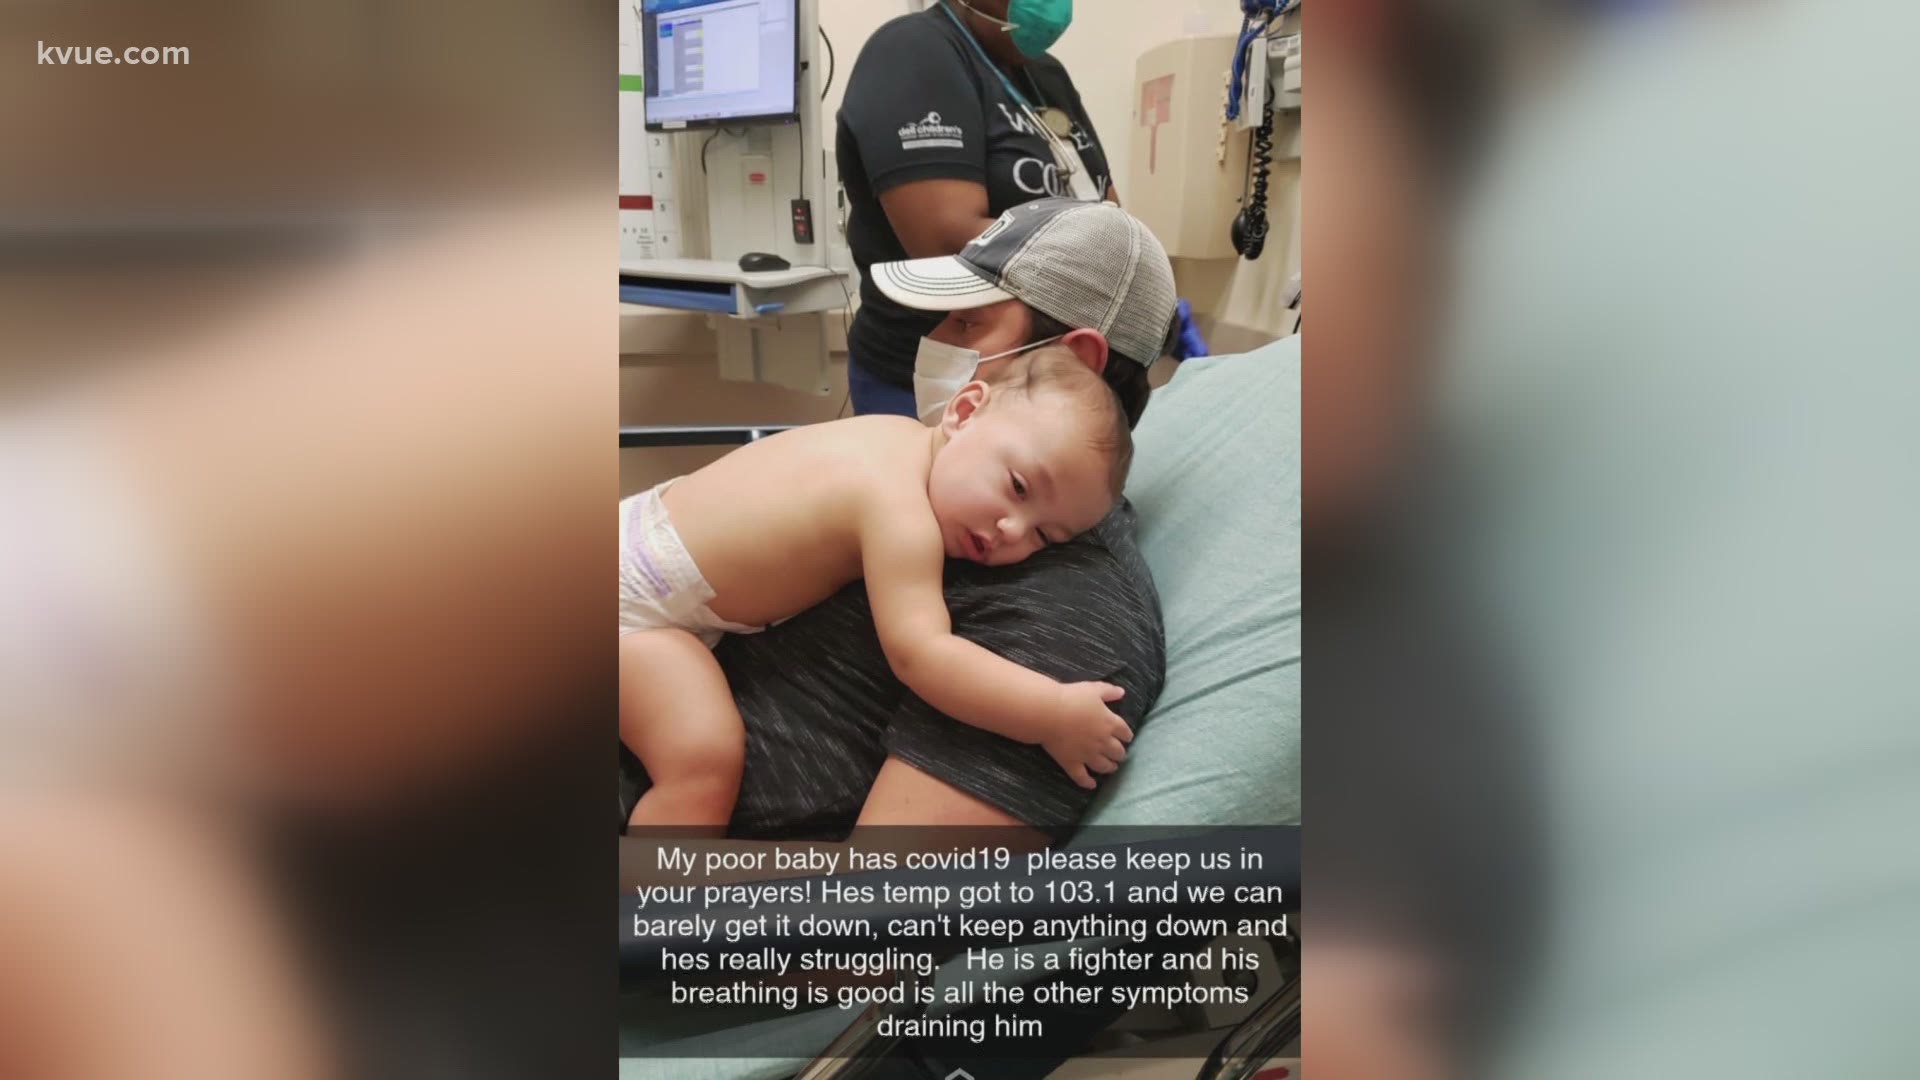 An Austin baby is fighting the toughest battle of his young life against COVID-19. His family is quarantining while taking care of the 7-month-old.